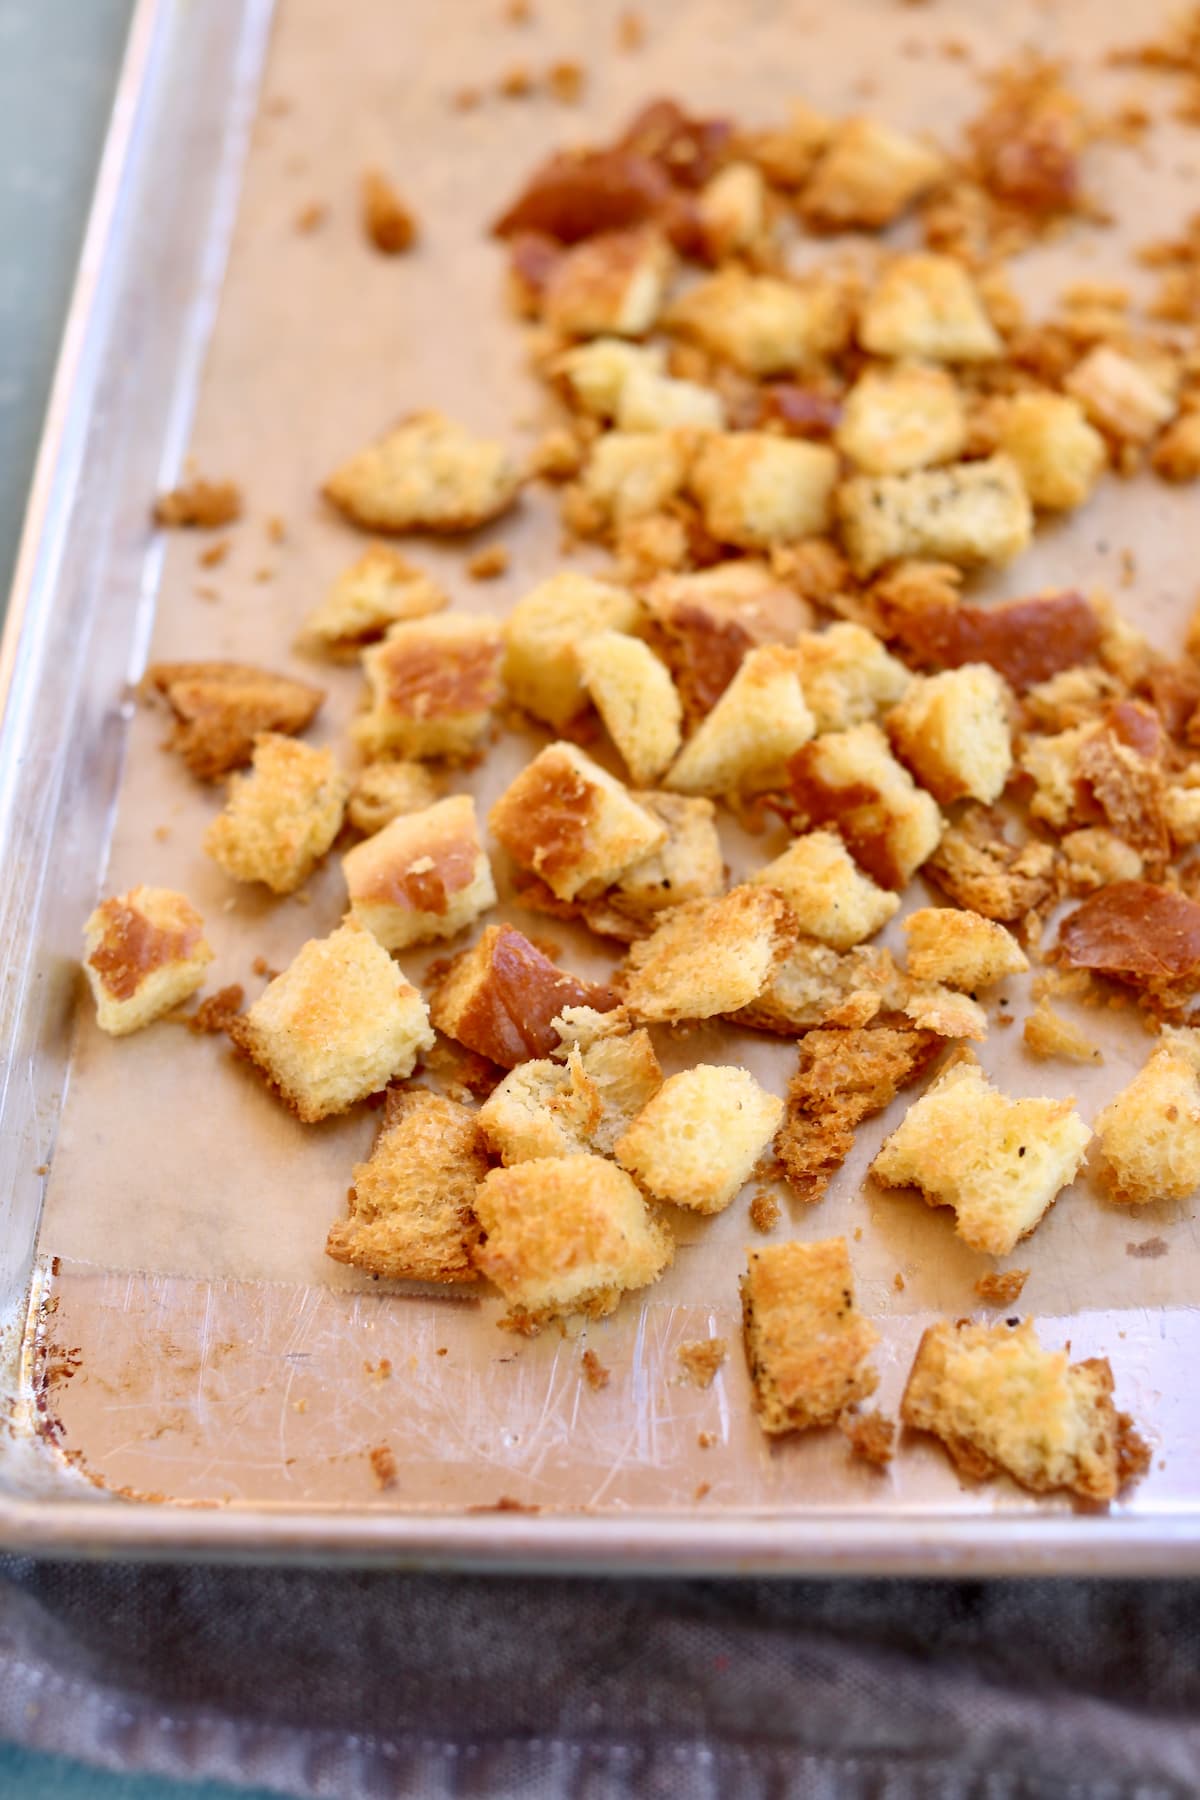 a baking sheet of baked croutons.